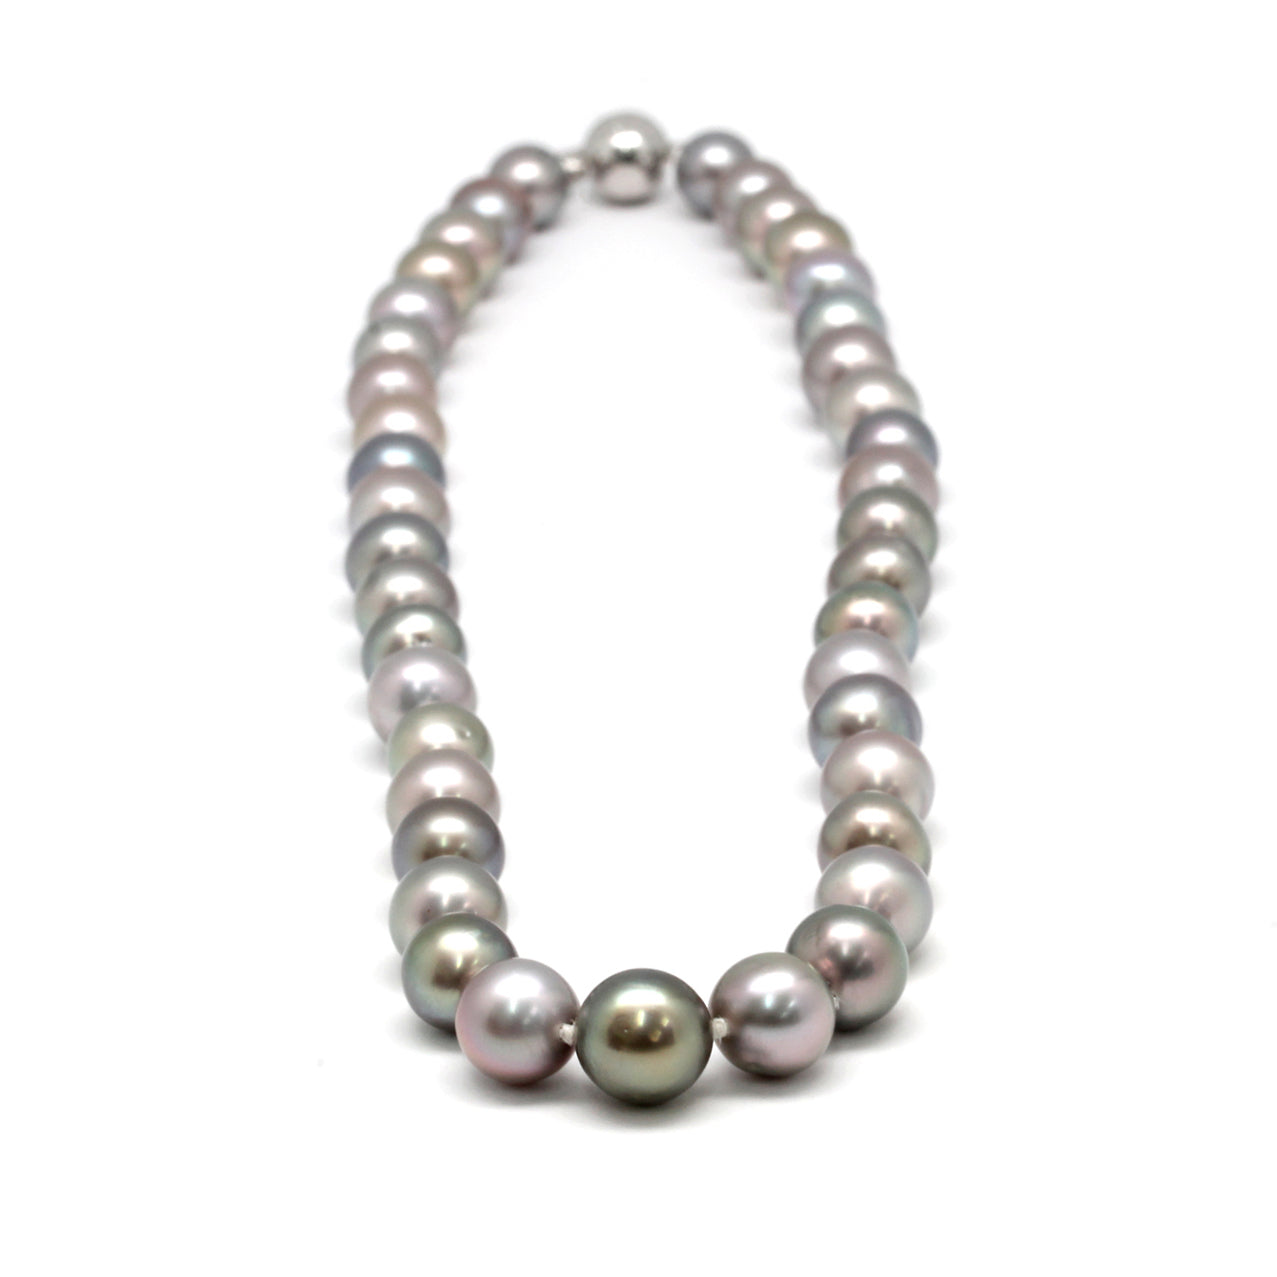 Gorgeous Iridescent Sea of Cortez Pearl Necklace